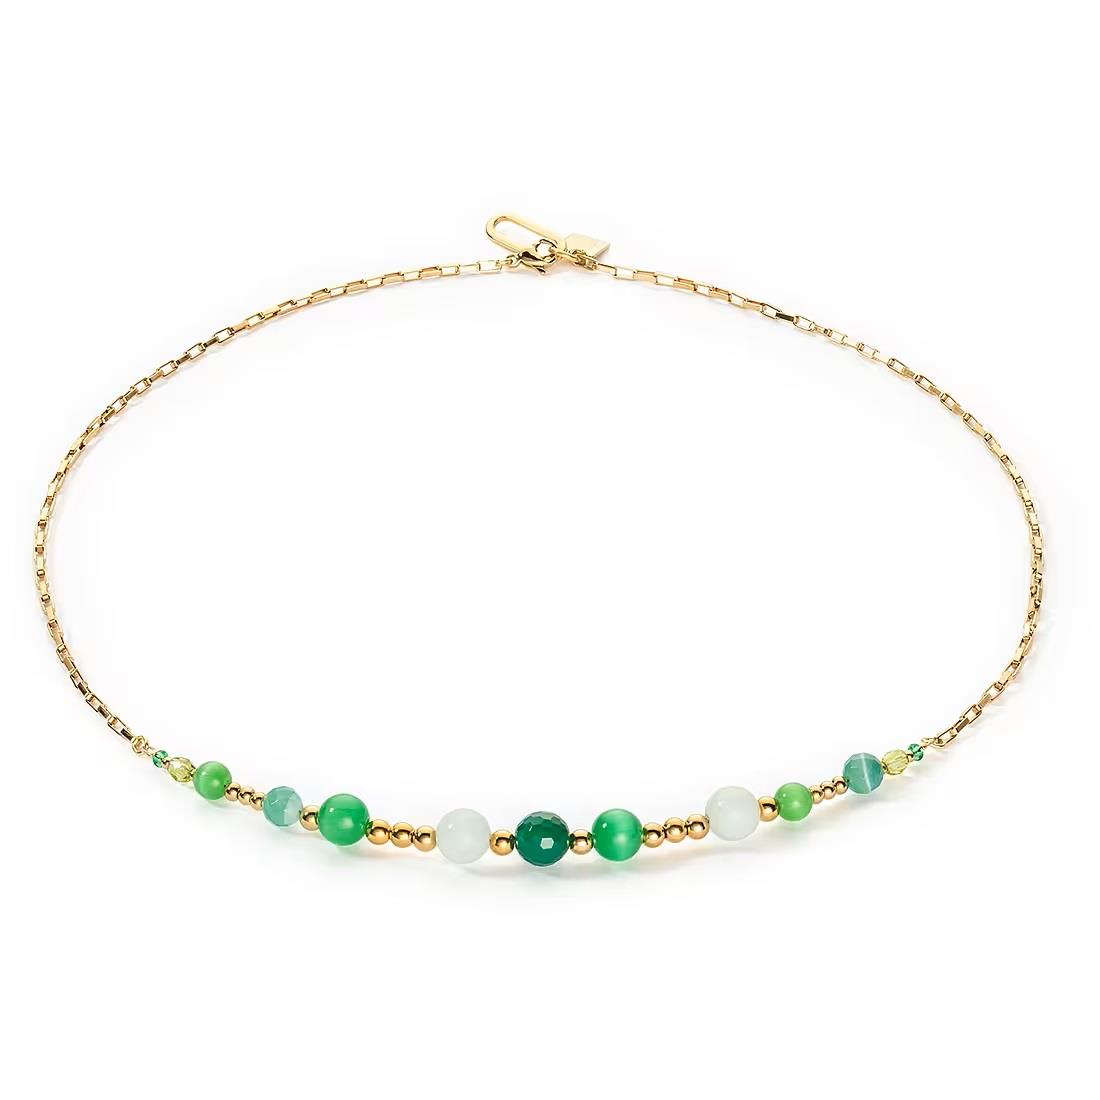 Candy necklace with green spheres - COEUR DE LION